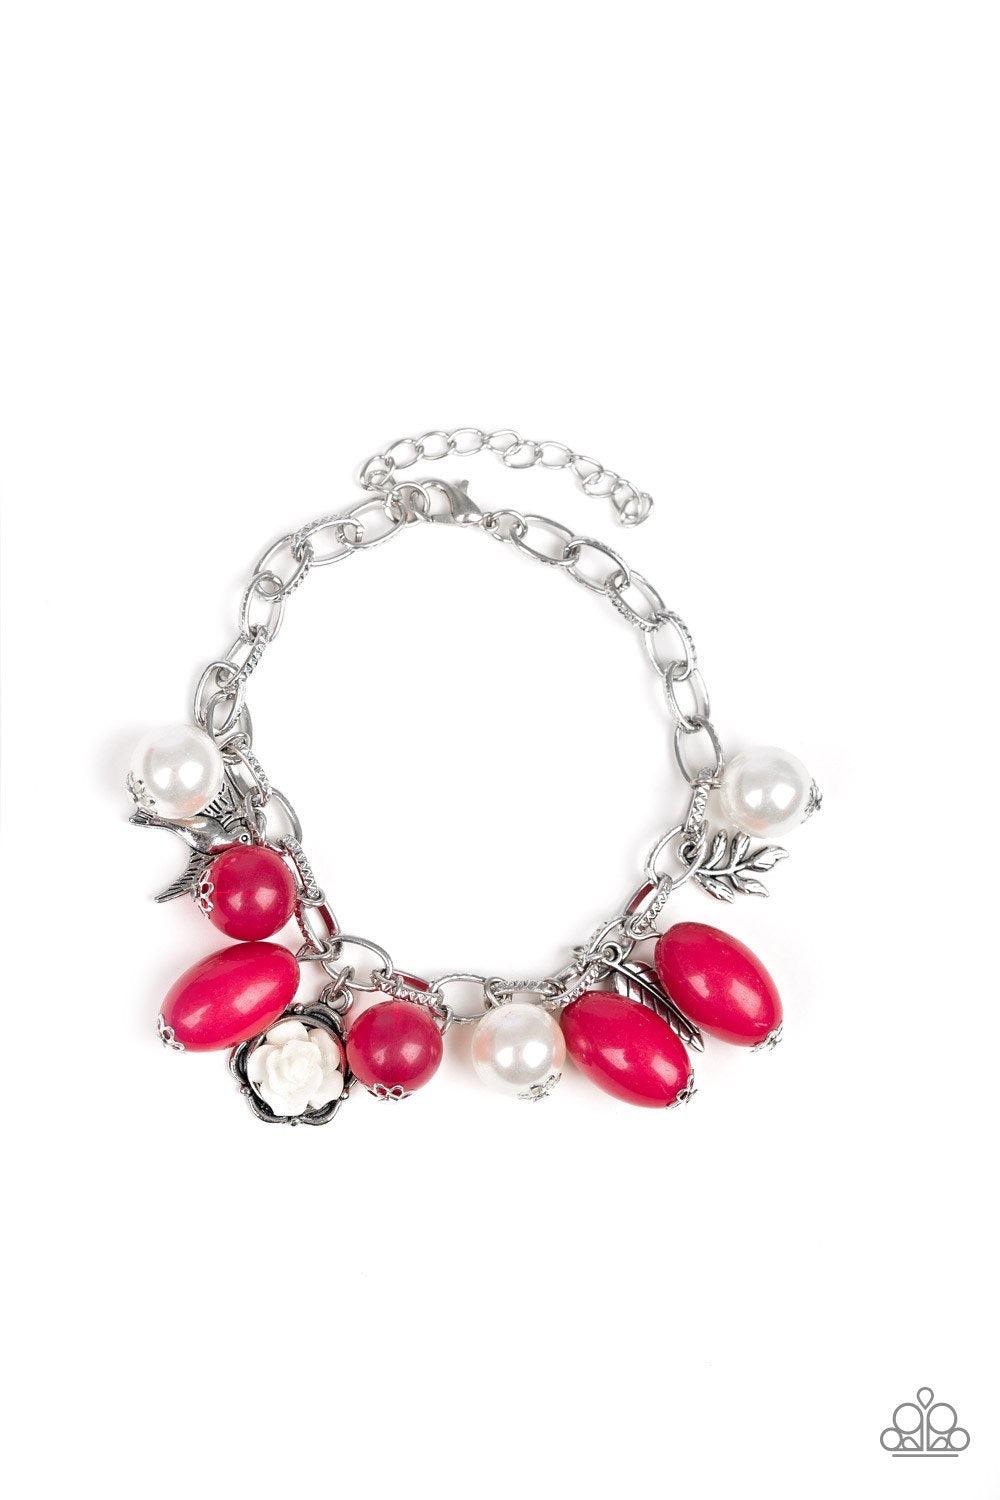 Paparazzi Accessories Love Doves - Pink Gorgeous pearls, shiny pink beading, and a collection of shiny silver charms, including a bird and a feather, dance around the wrist in a whimsical fashion. Features an adjustable clasp closure. Sold as one individu